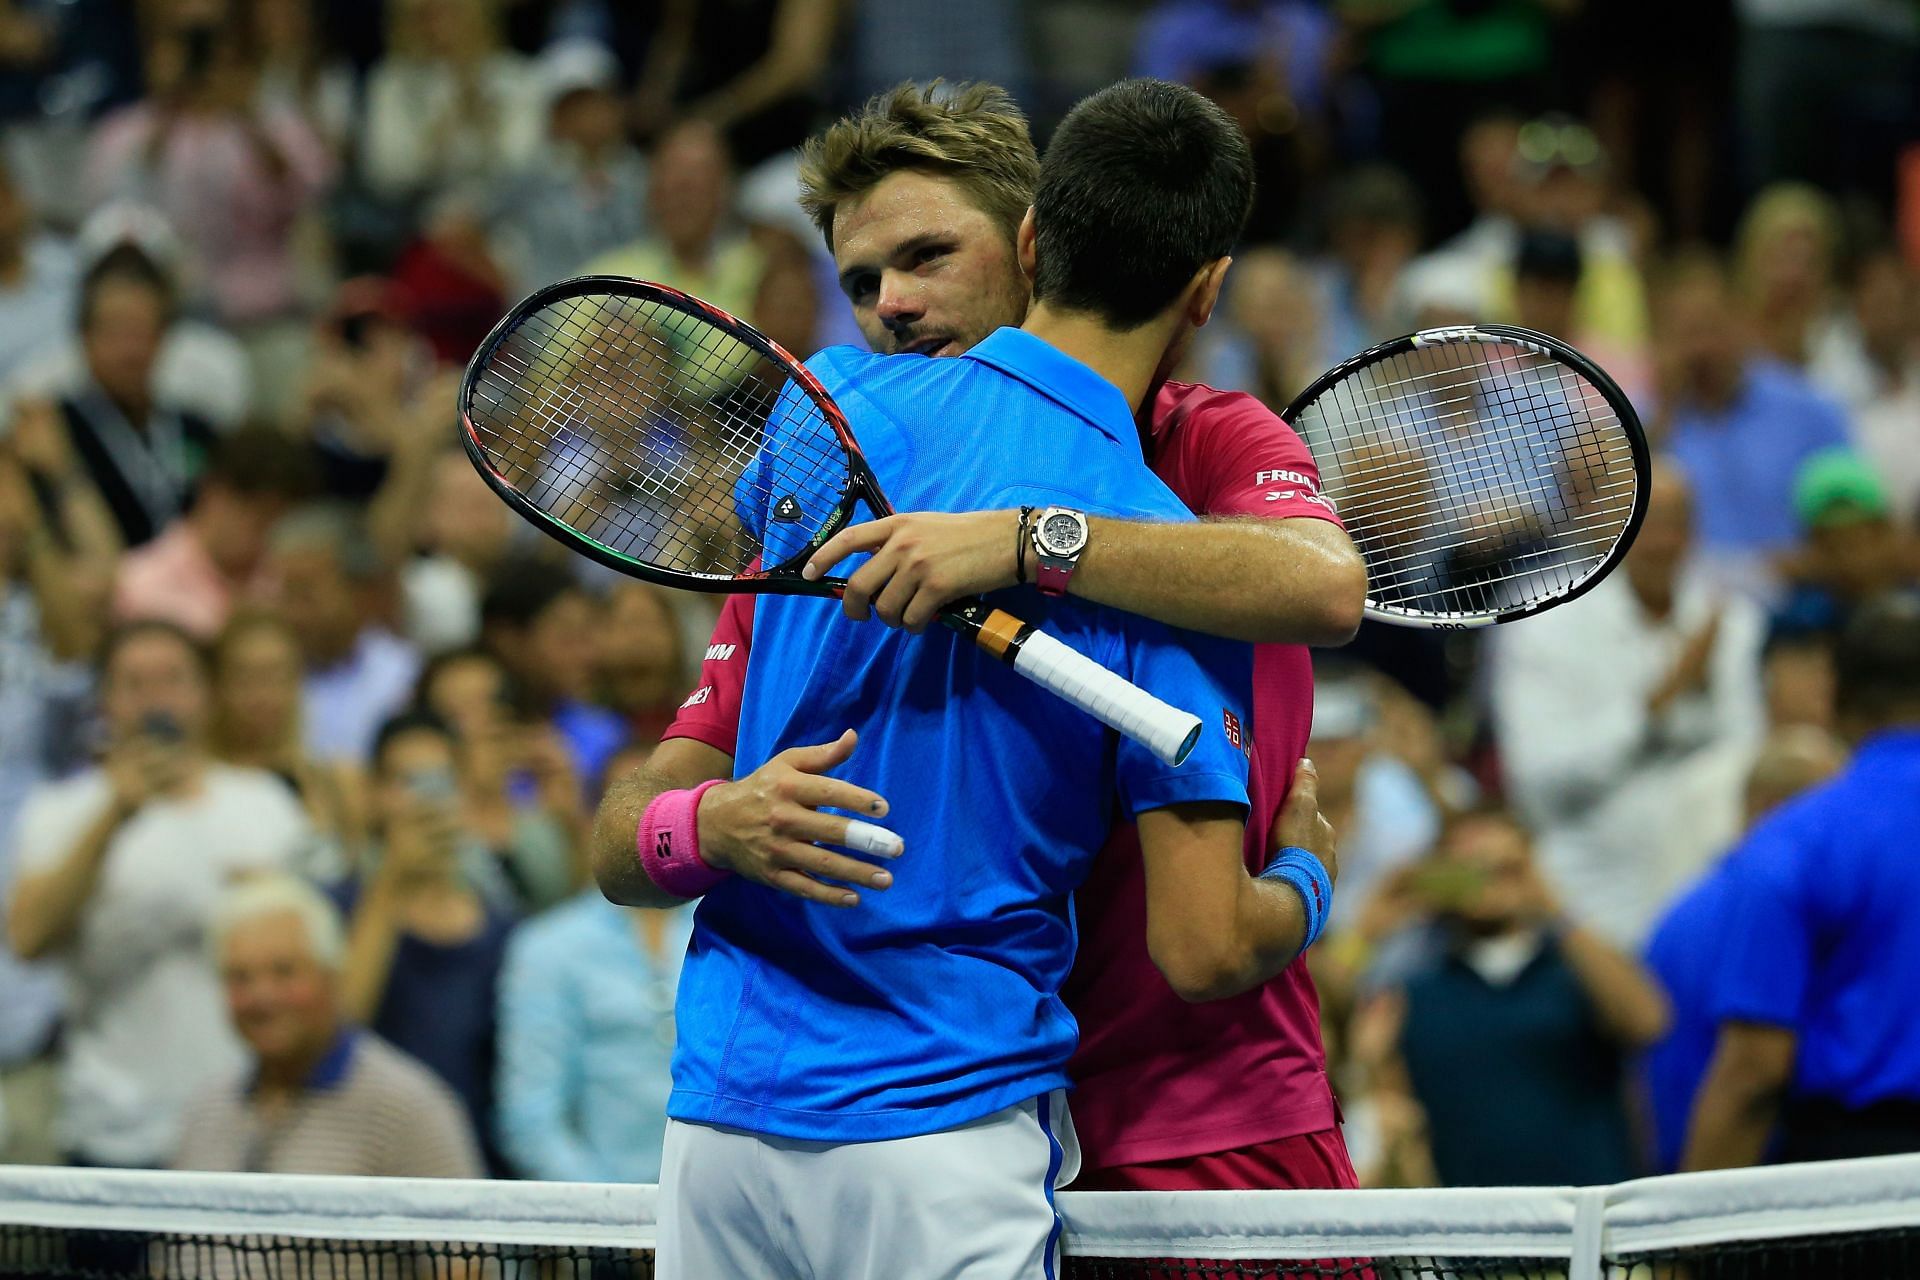 The two players share an embrace after the 2016 US Open final.